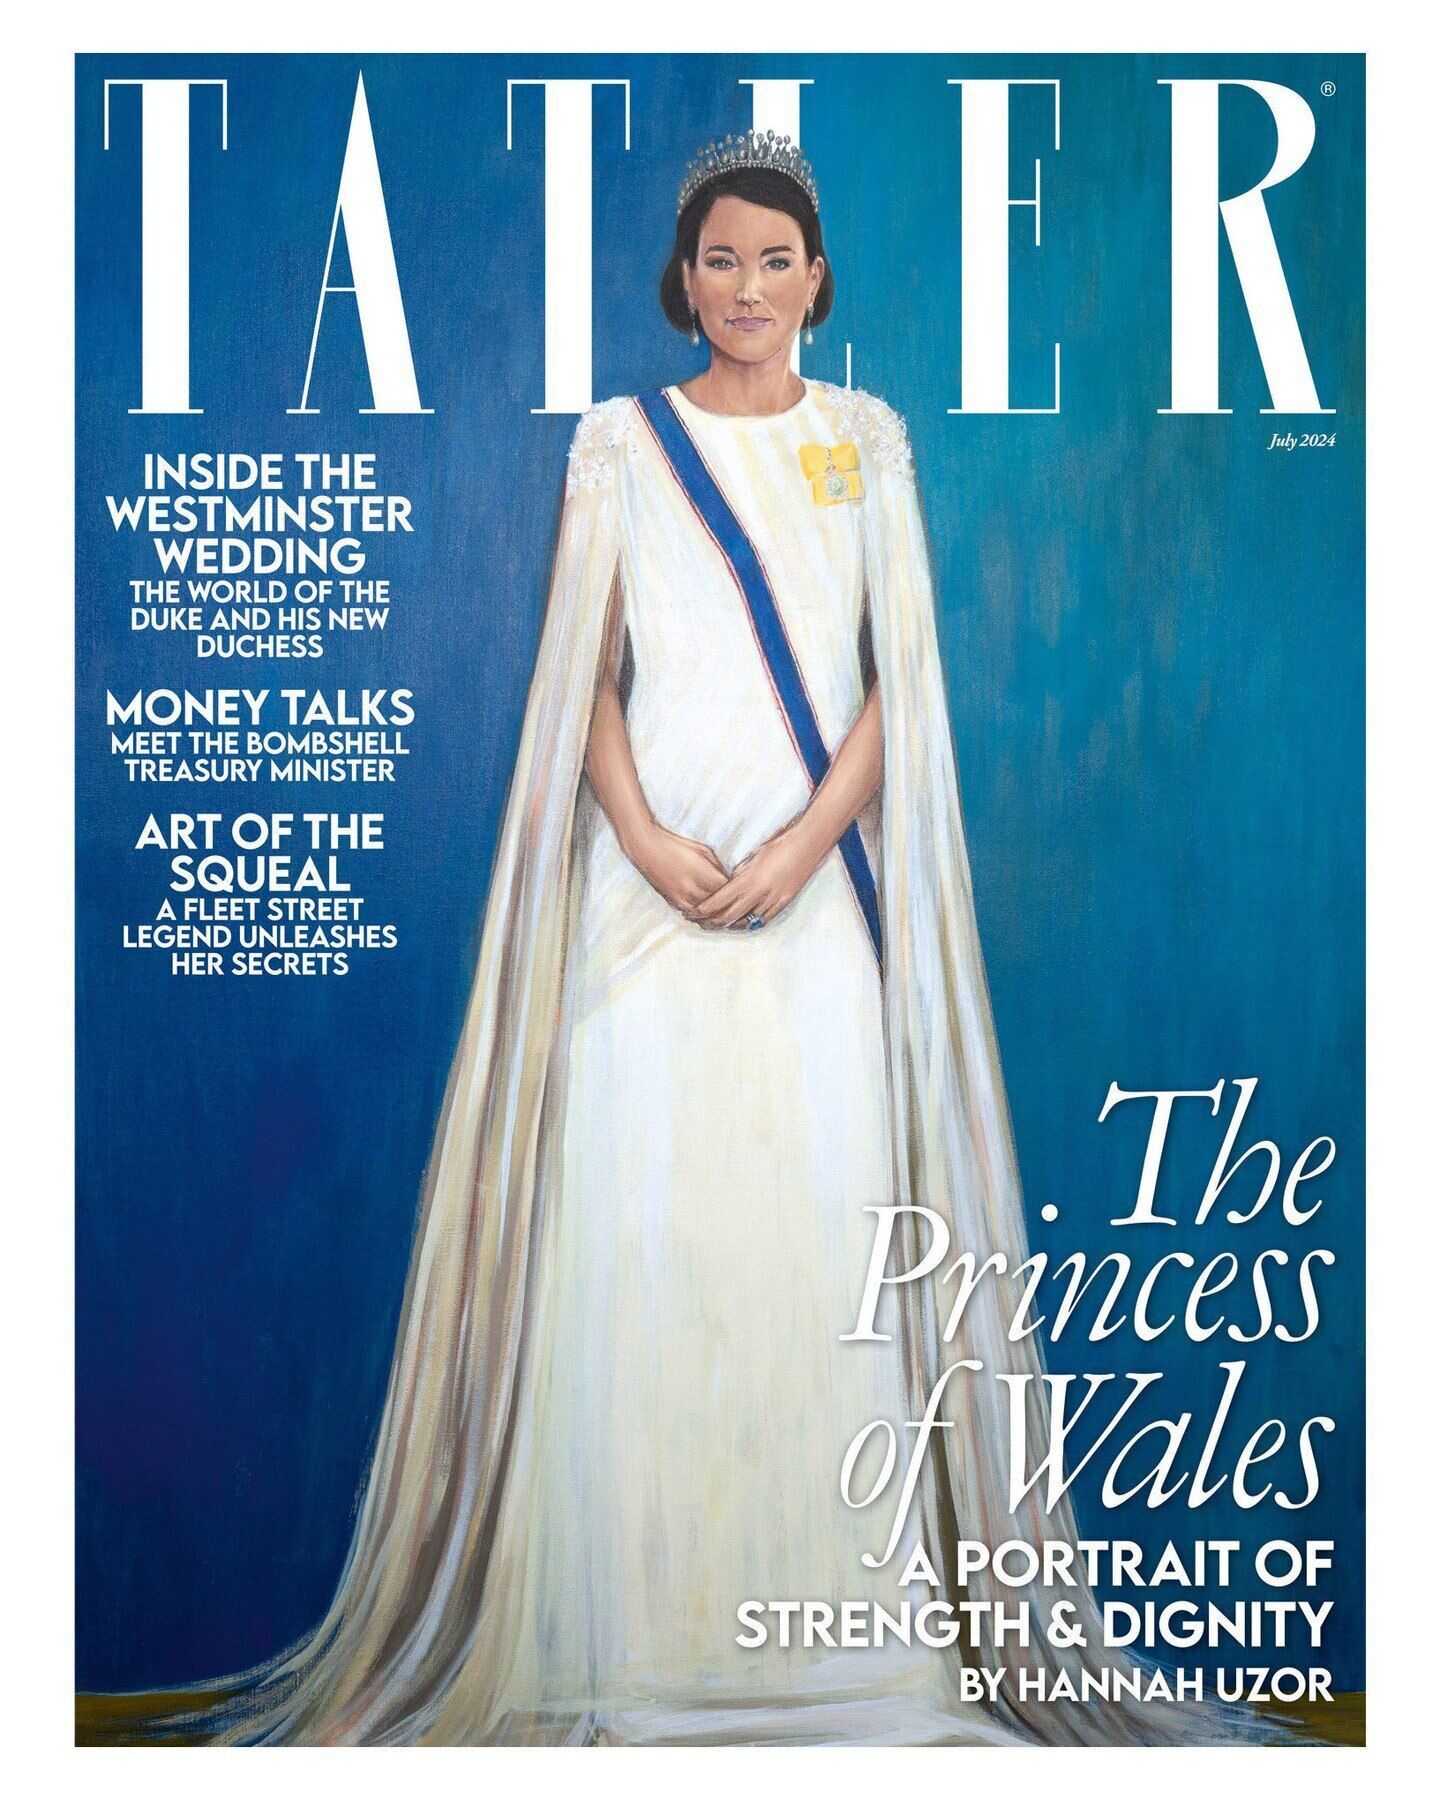 The new portrait of Kate Middleton on the cover of the magazine has confused fans of the royal family. Photo